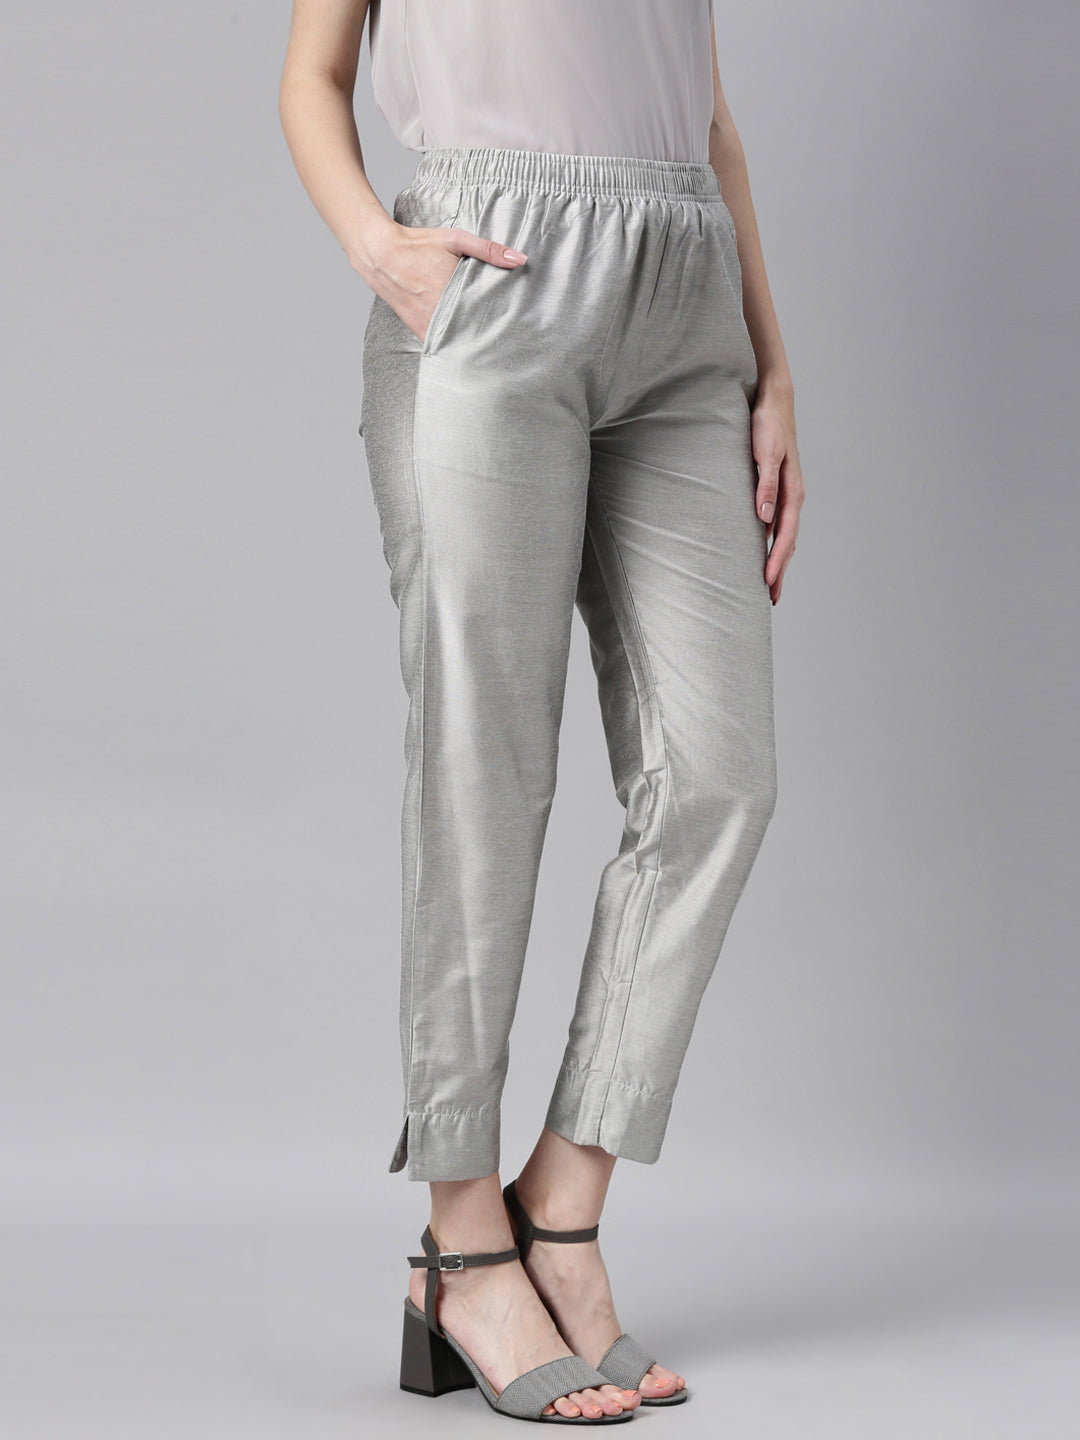 Women Solid Silver Grey Mid Rise Shiny Pants